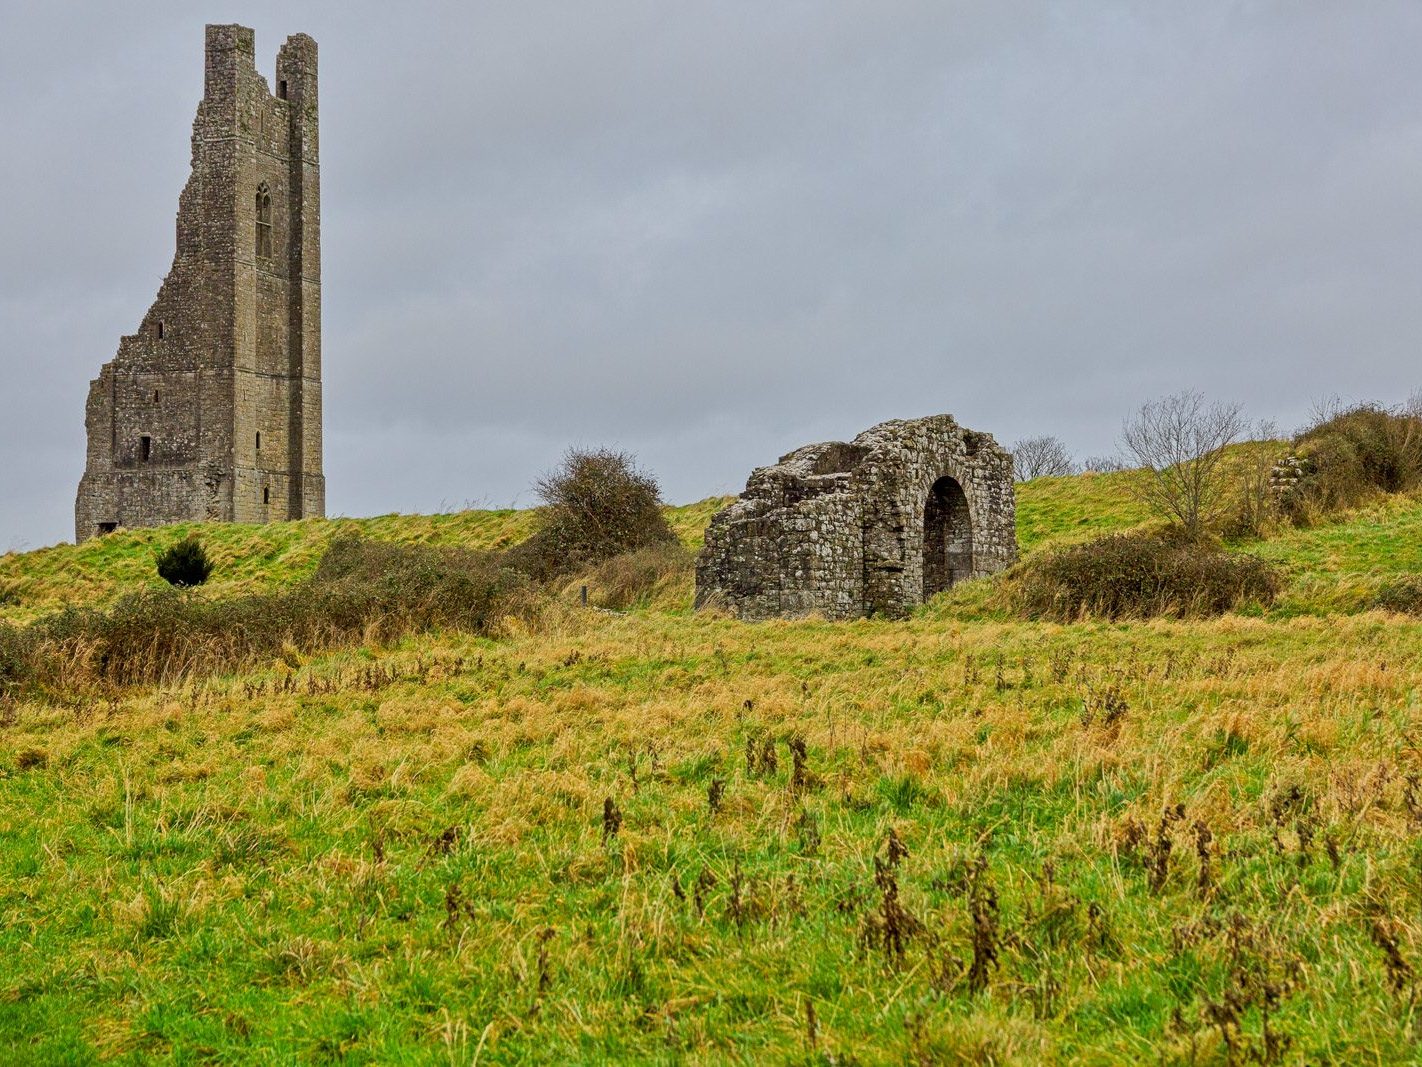 THE YELLOW STEEPLE DOMINATES THE TOWN OF TRIM [ALSO KNOWN AS ST MARYS ABBEY]-226735-1